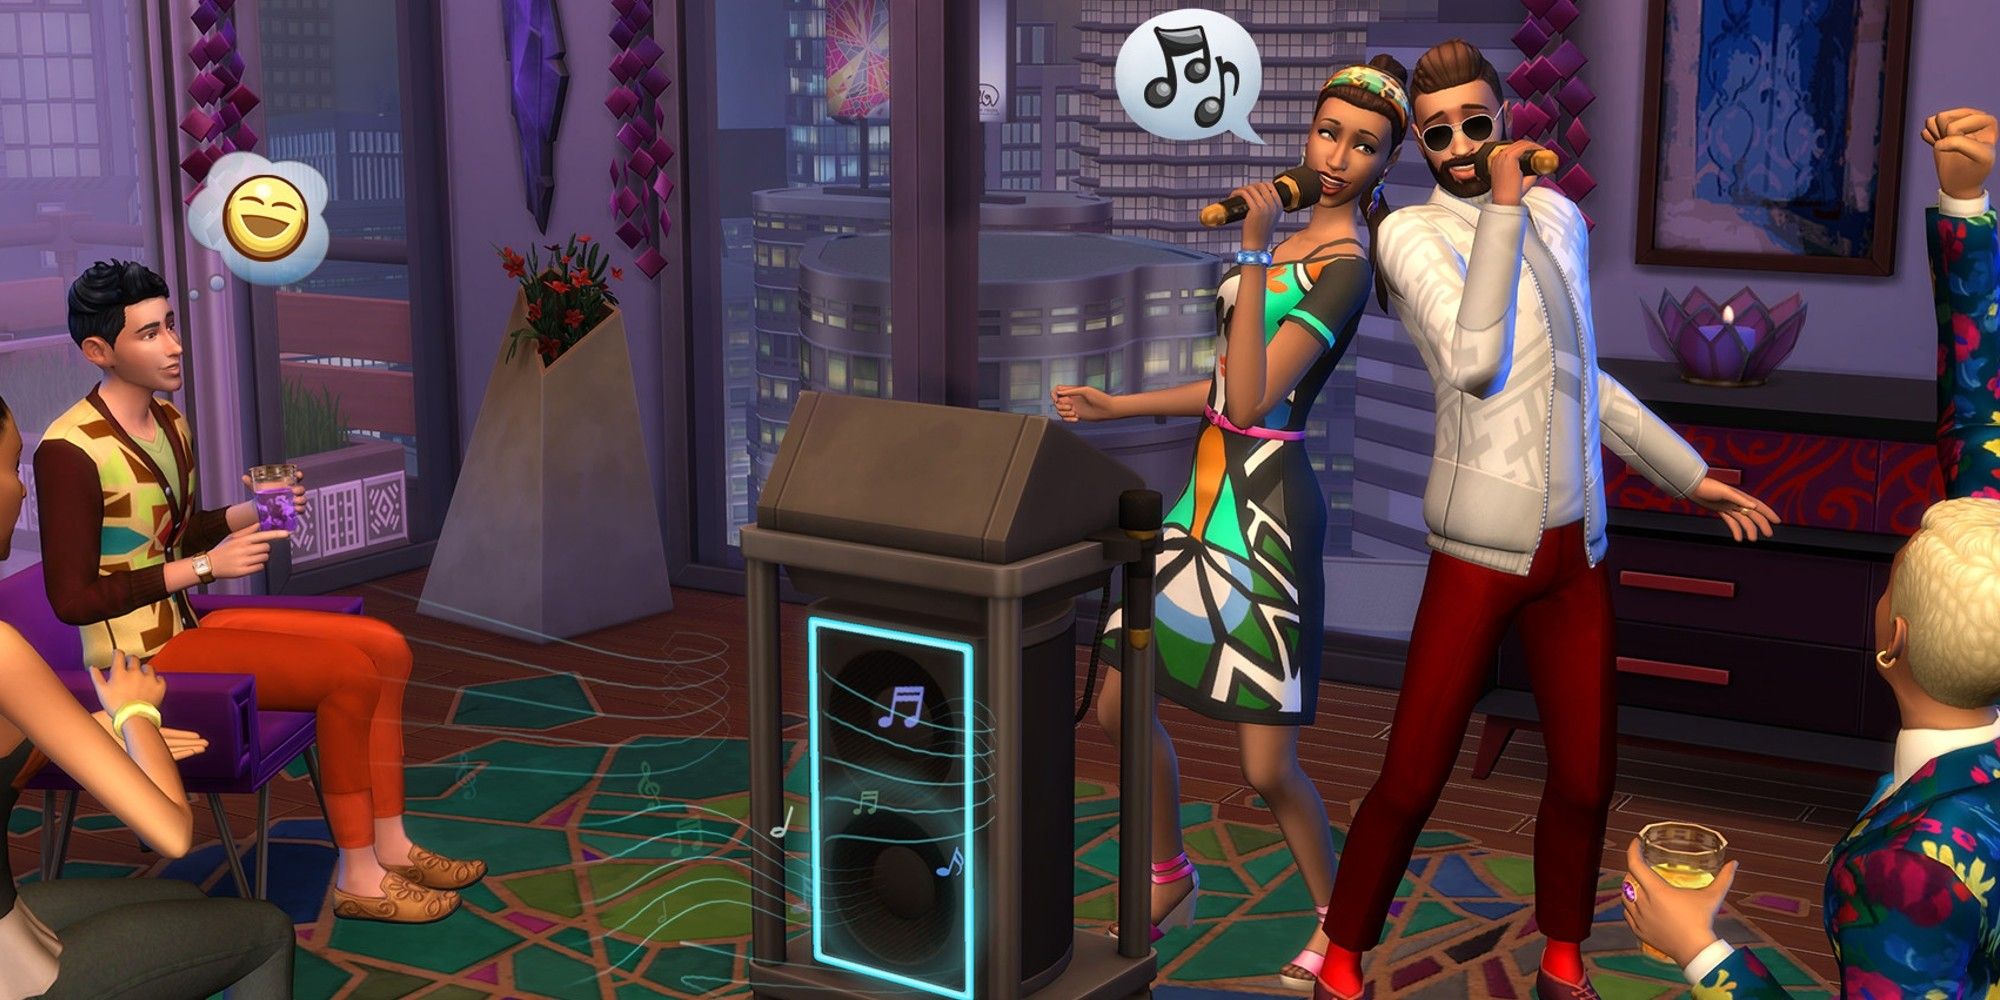 A male and female Sim singing karaoke together with a city backdrop behind them as other Sims excitedly watch.